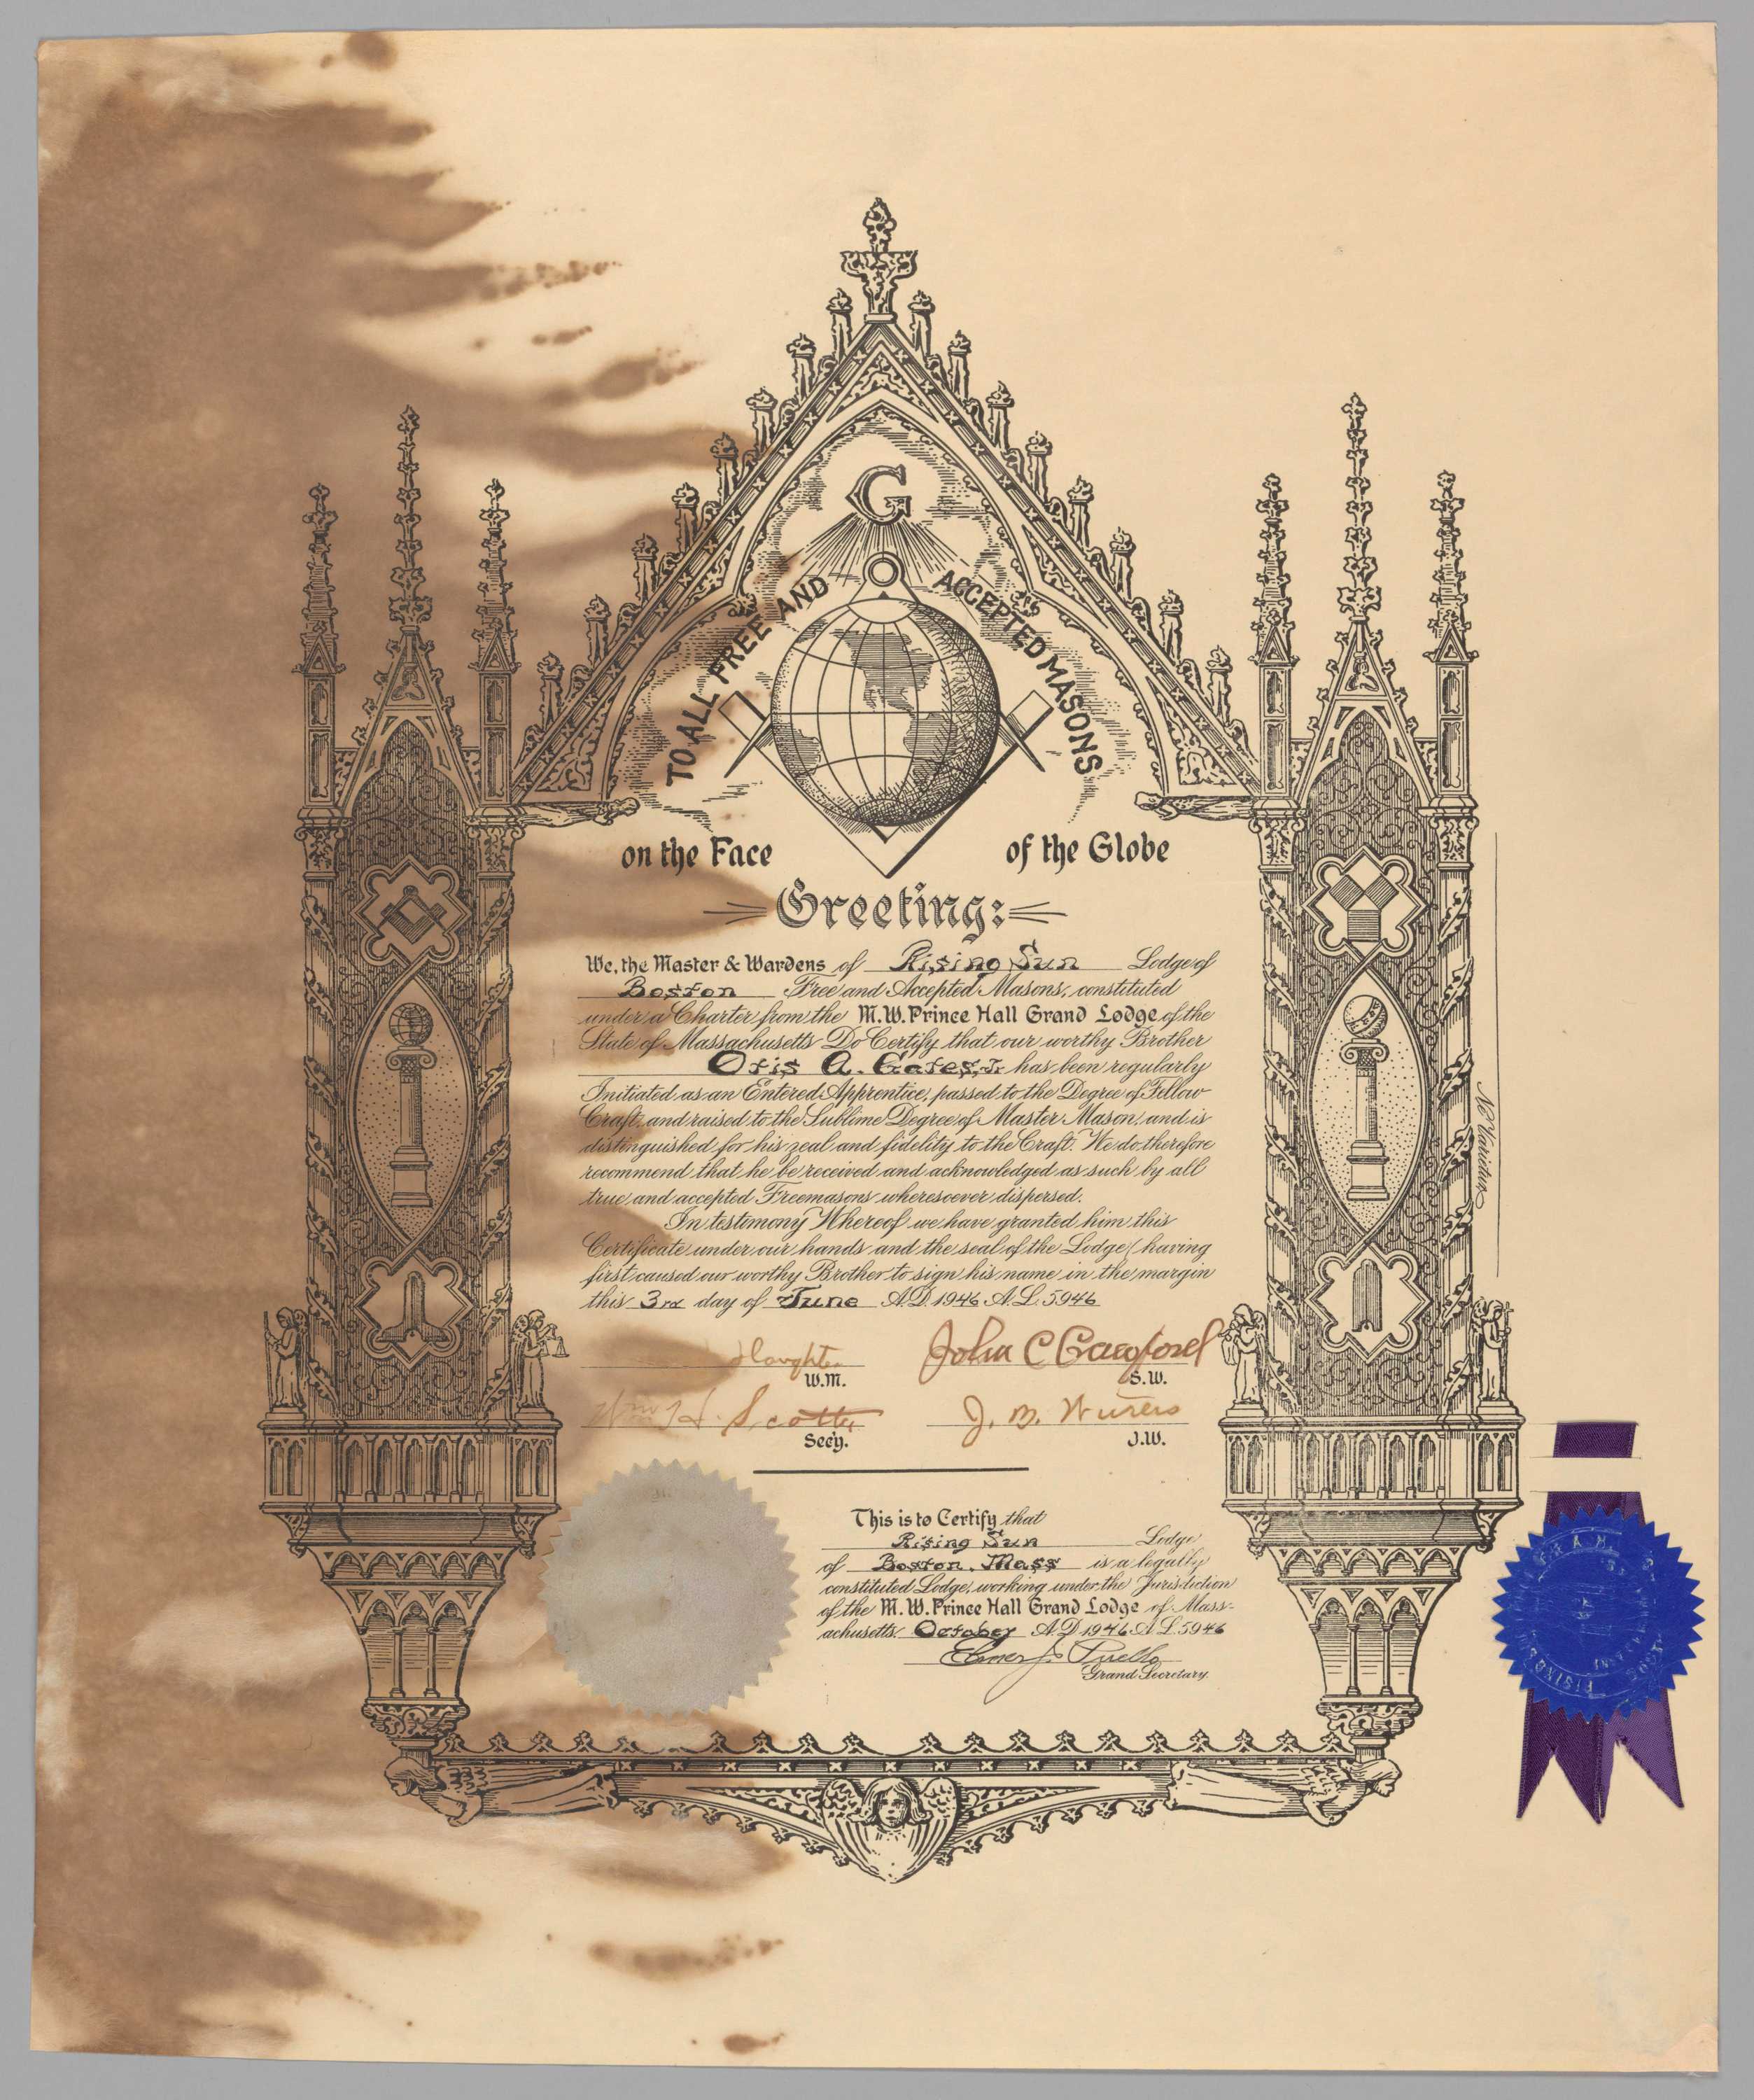 A certificate of initiation for Otis A. Gates Jr. into the Rising Sun Masonic Lodge a part of the Most (M.) Worshipful (W.) Prince Hall Grand Lodge of Massachusetts.